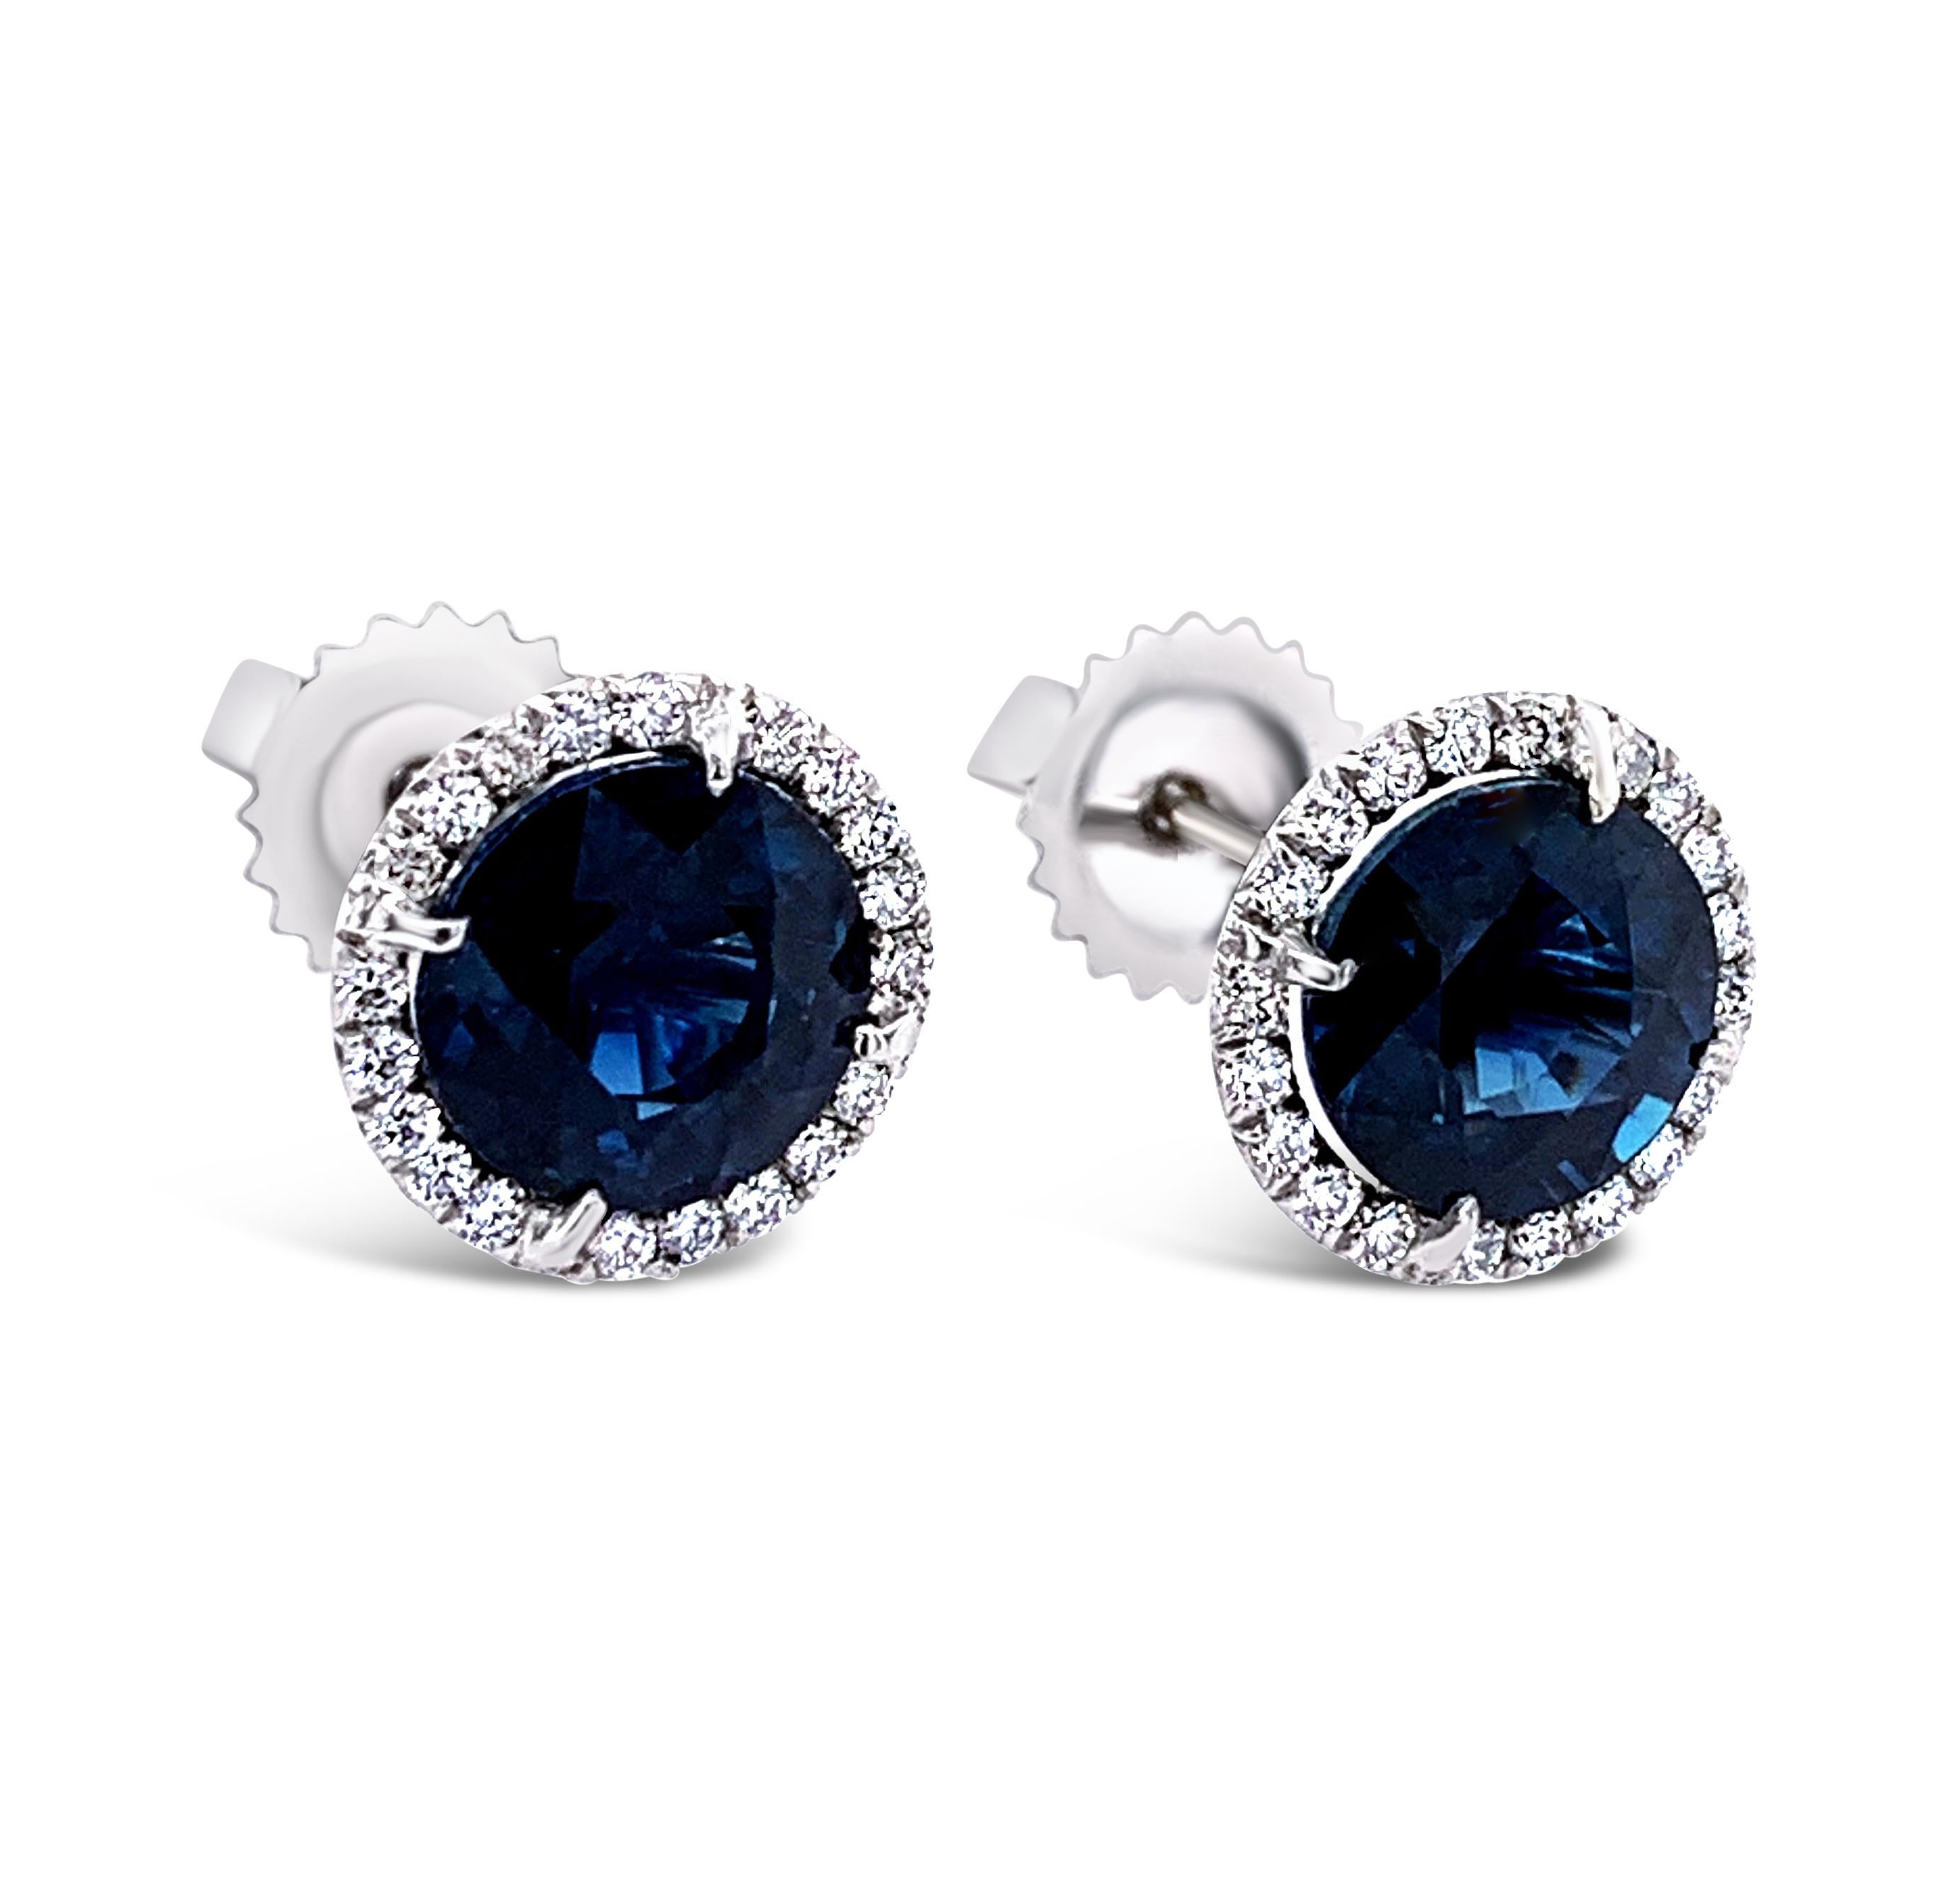 4.15 Carat (total weight) Sapphire and Diamond Halo Stud Earrings in 18K White Gold.  Diamond halos weigh 0.30 Carat (total weight) and have a color grade of H-I and clarity of SI-1 to SI-2.  The earrings measure 9.5mm across.
